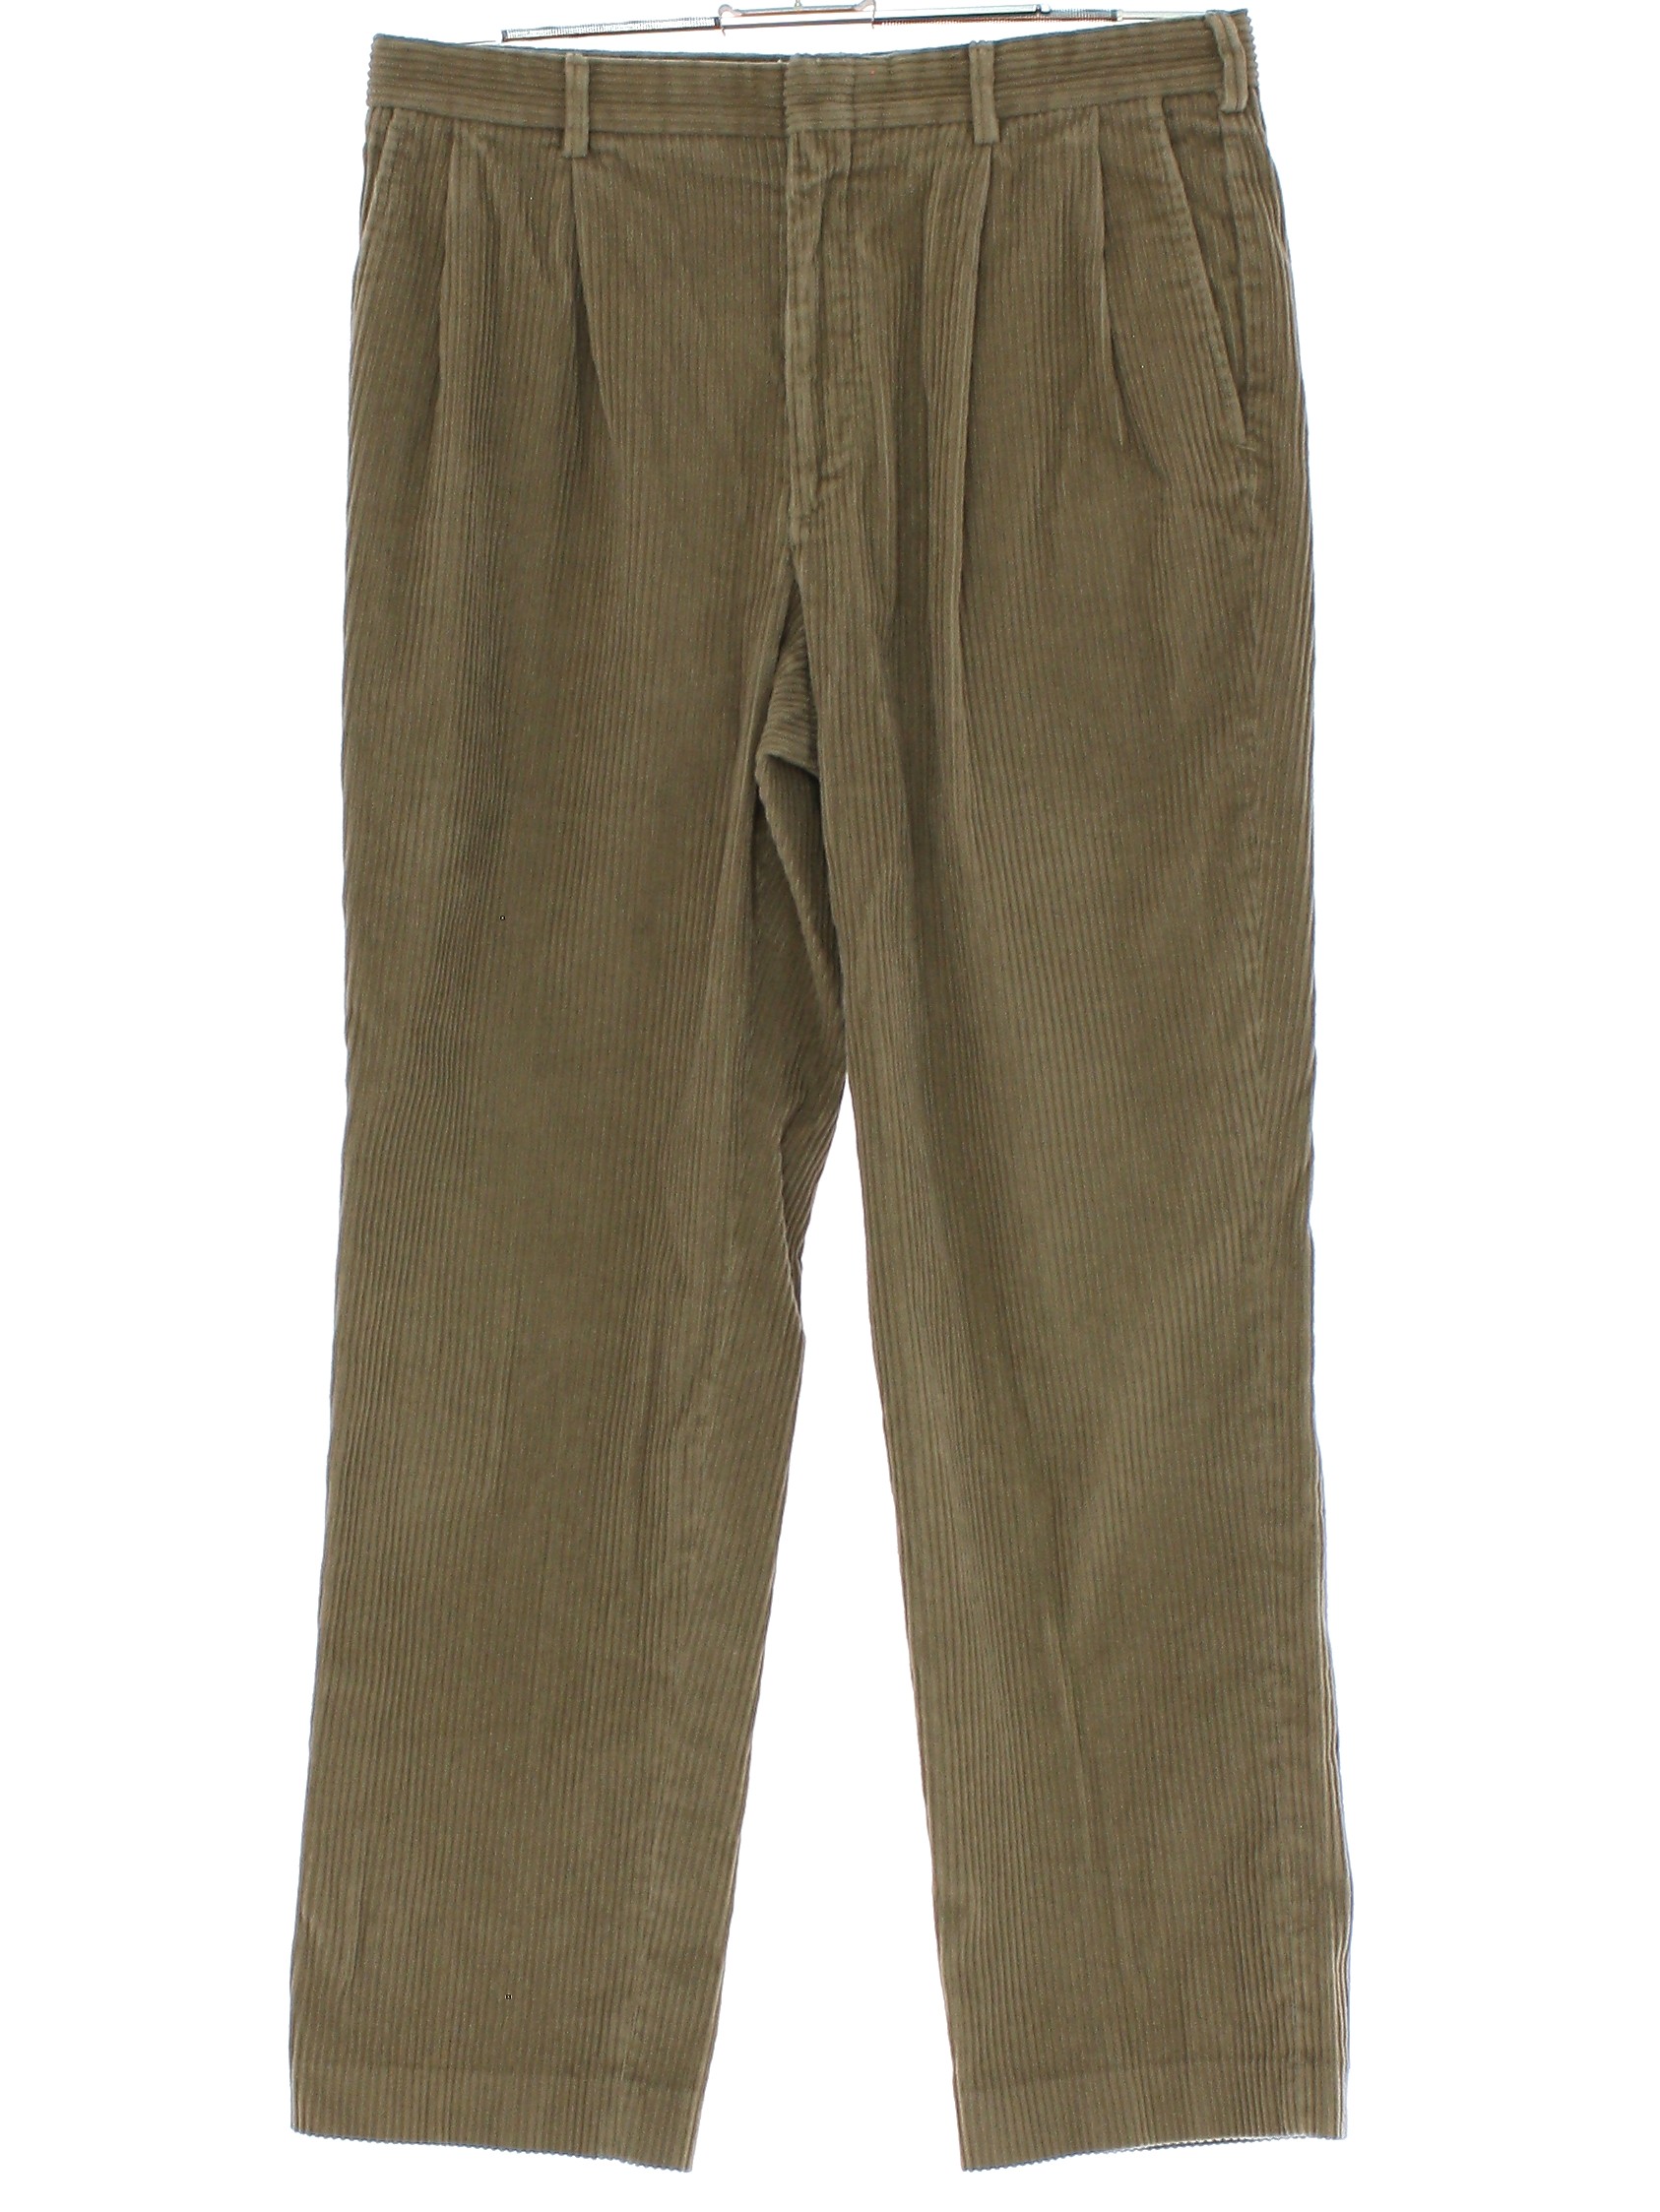 1980's Retro Pants: Late 80s or early 90s -Lands End- Mens mocha brown ...